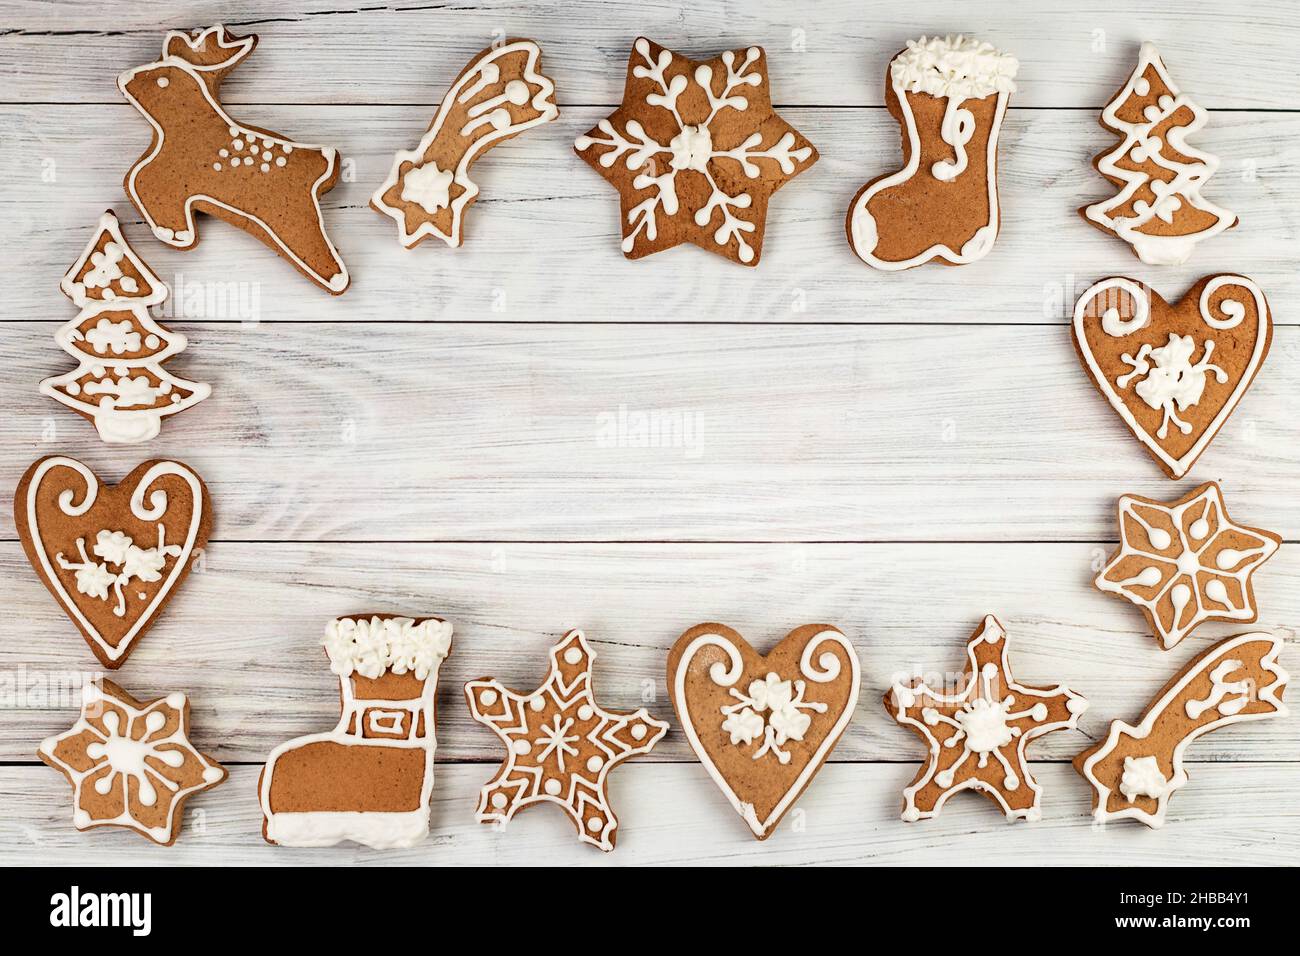 Hand made various Christmas gingerbread cookies, Place for text. Stock Photo